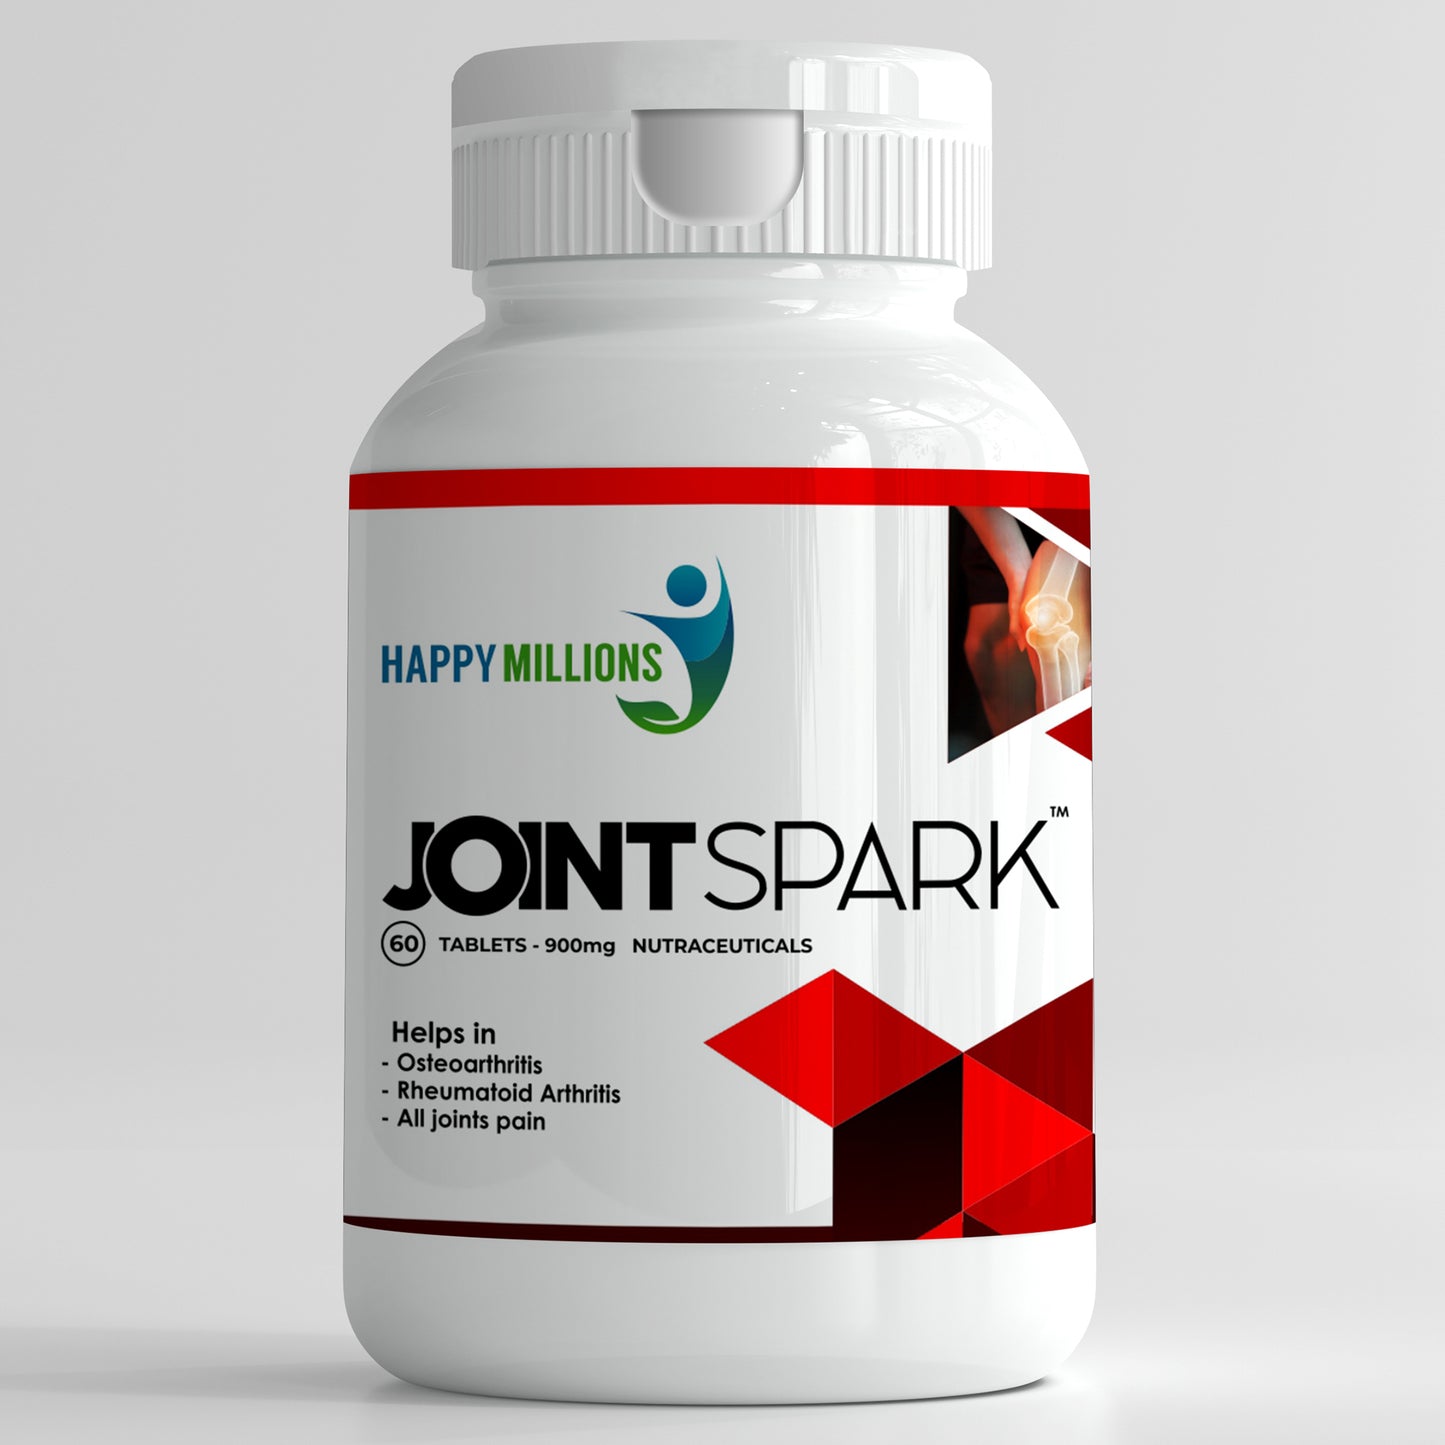 Happy Millions JointSpark - Get Relief From Pain | 60 Tablets